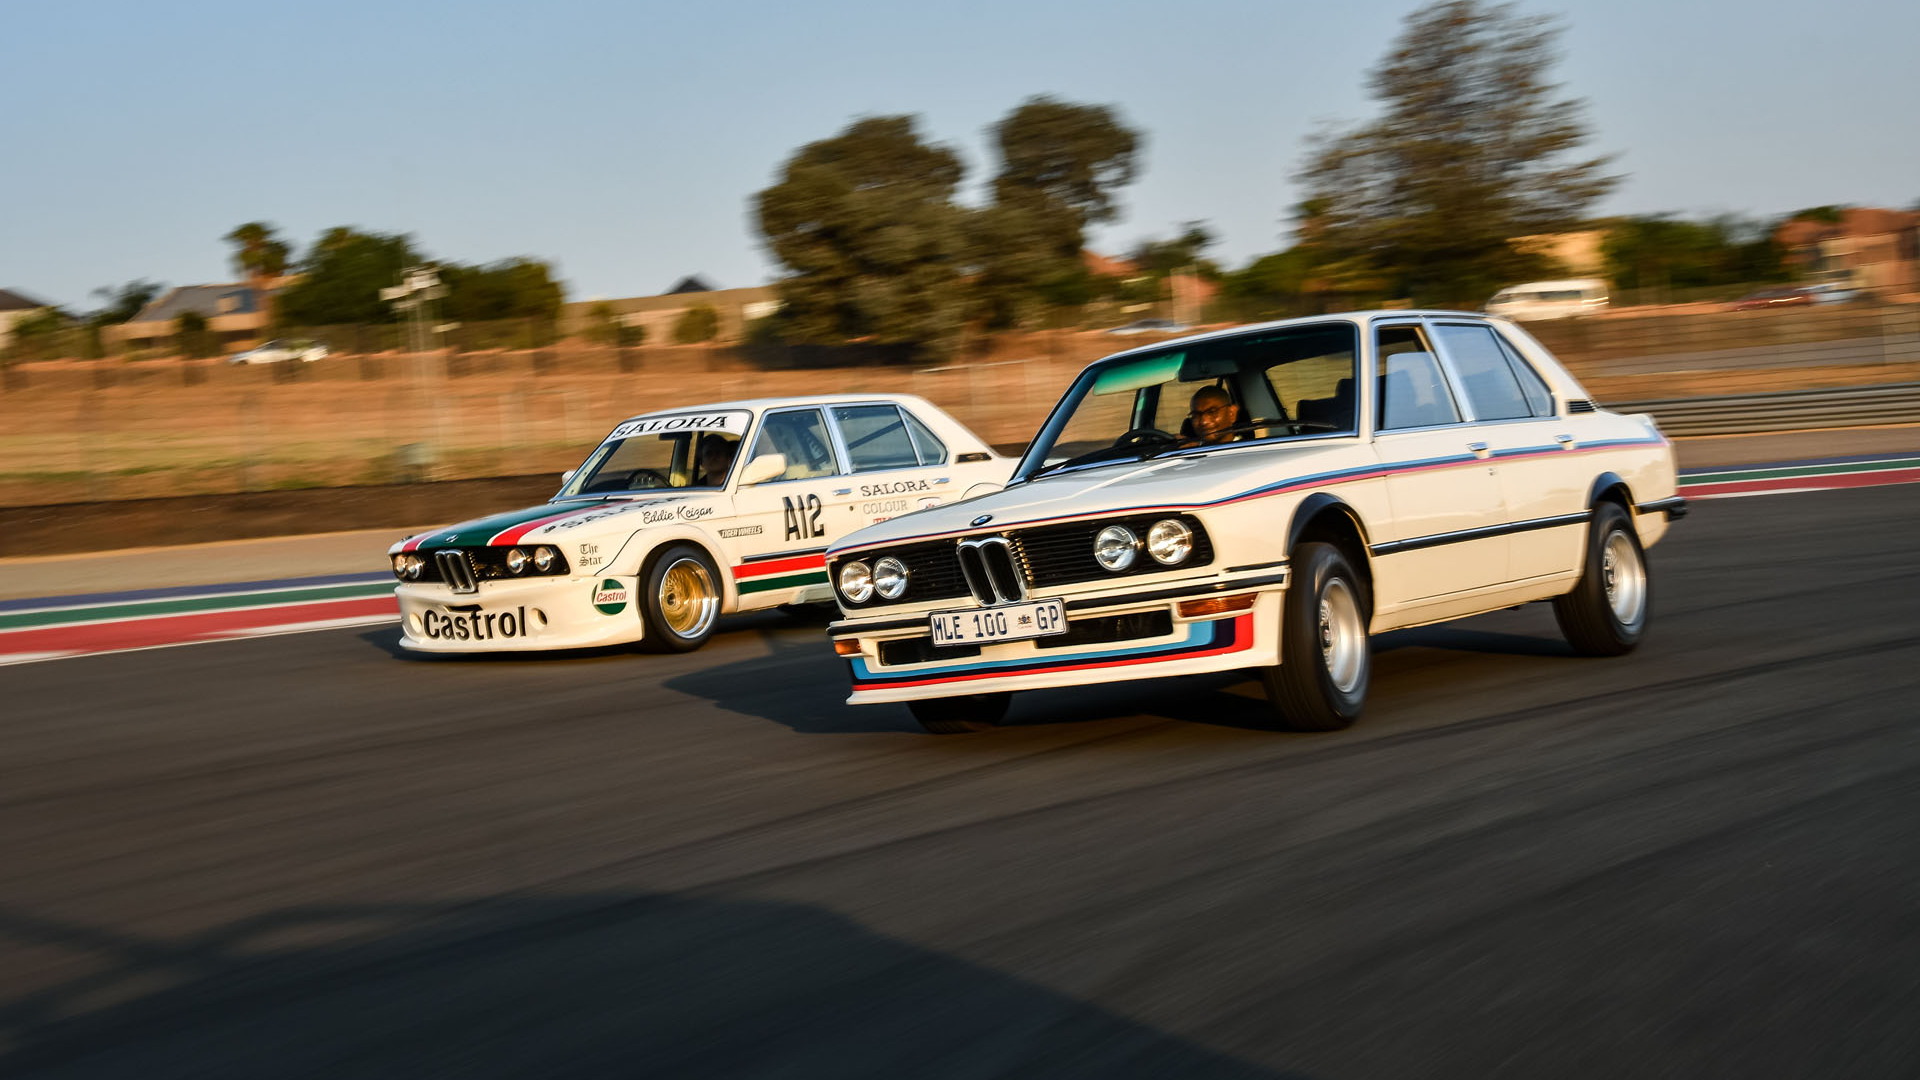 BMW 530 MLE road and race car reunion